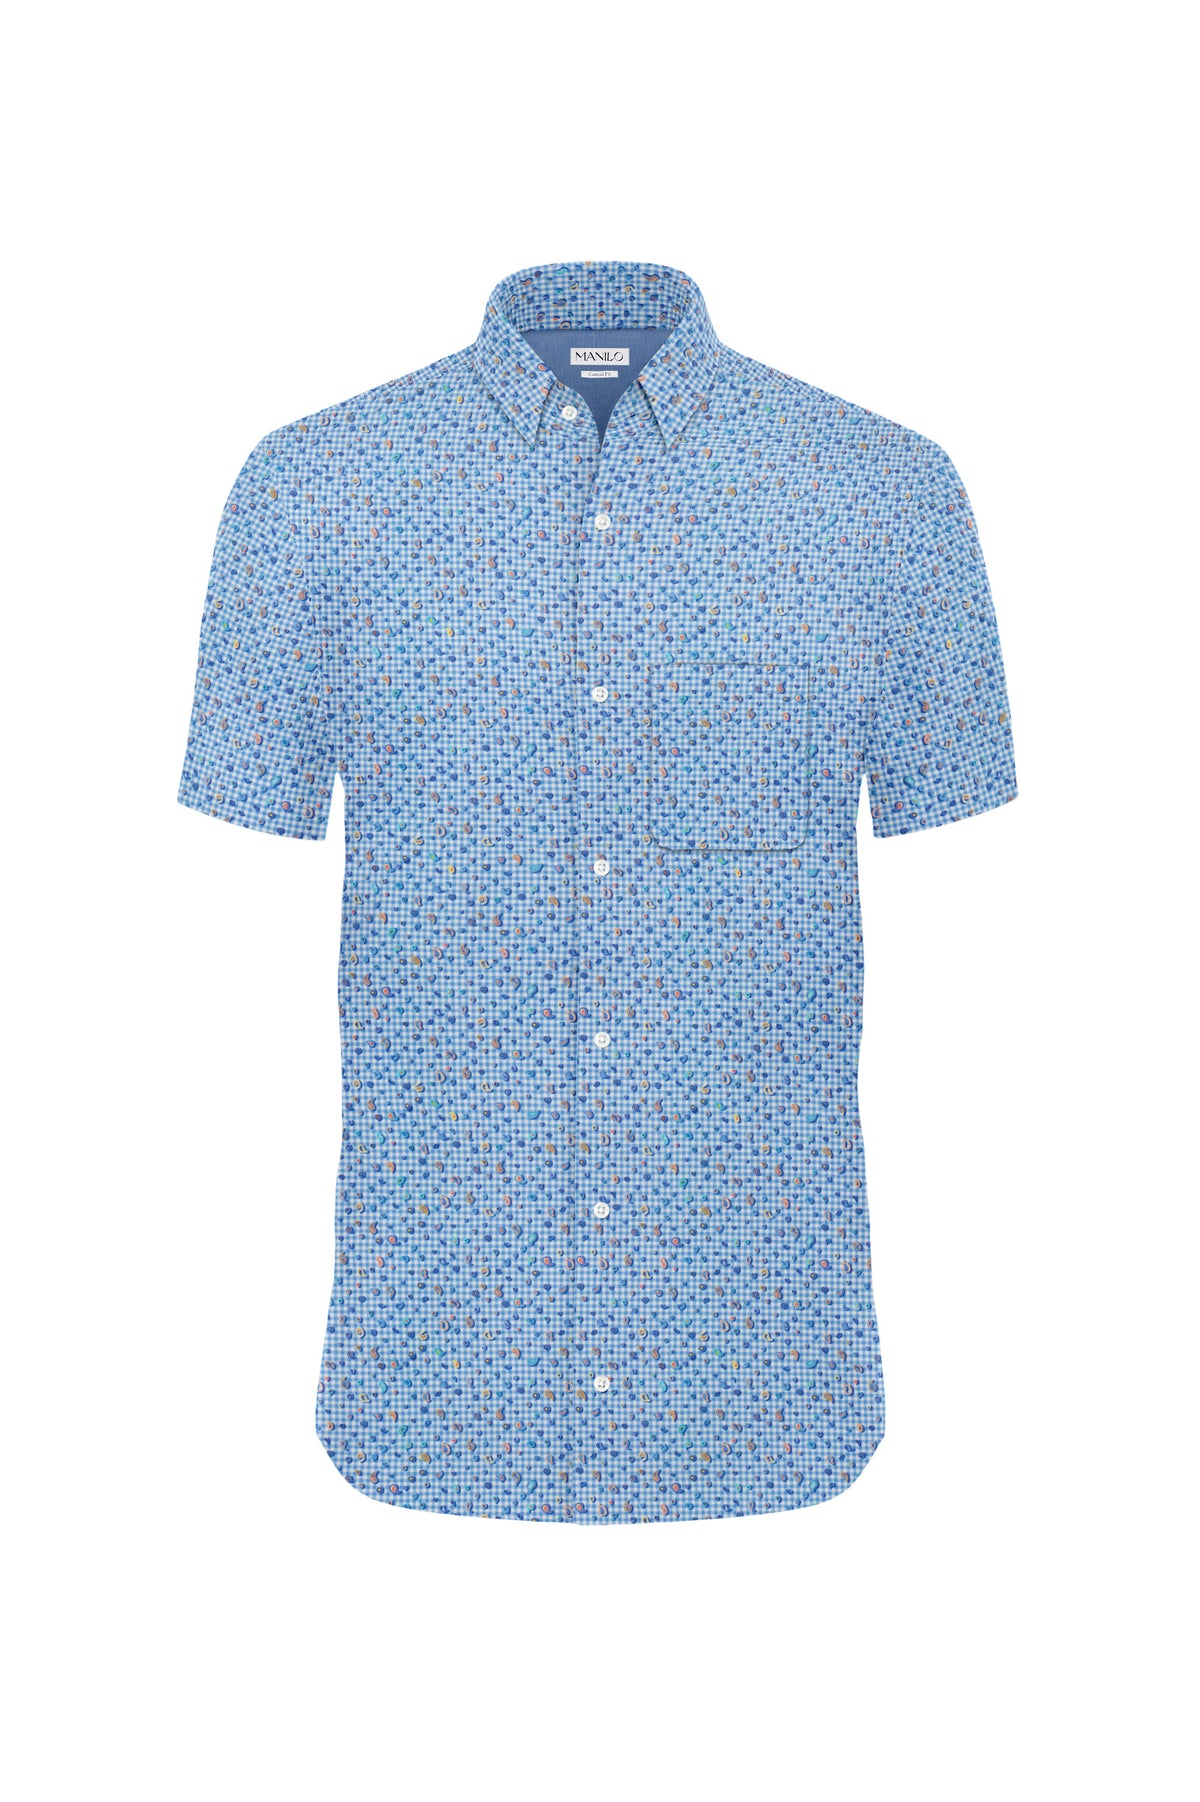 Casual shirt with check pattern in blue (Art. 2217-C-KA)